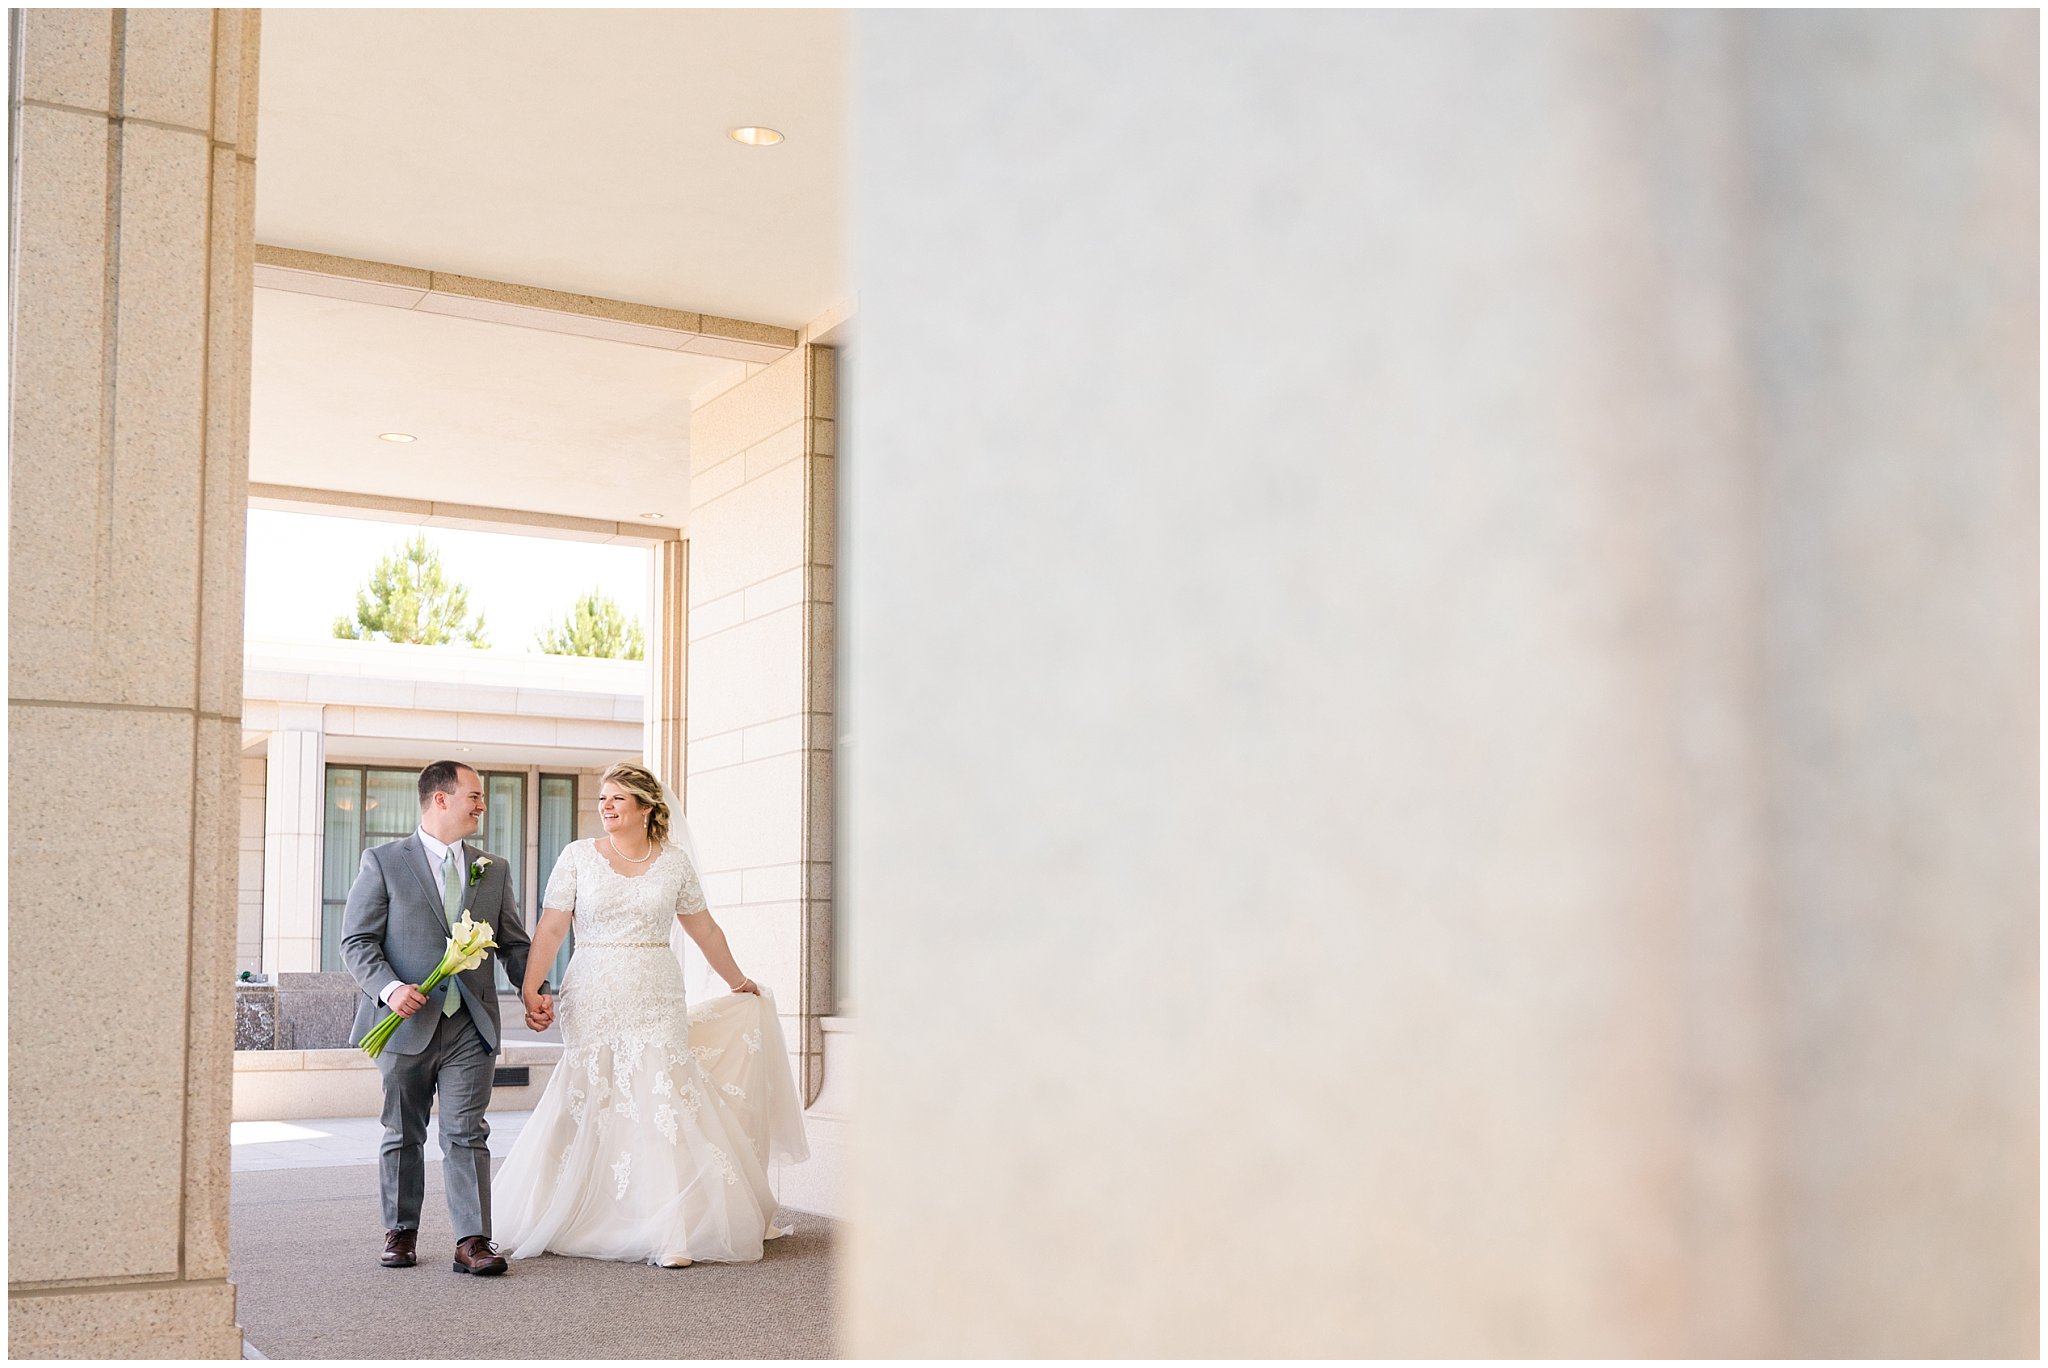 Bride and groom candid portraits at the temple | Oquirrh Mountain Temple and Millennial Falls Wedding | Jessie and Dallin Photography